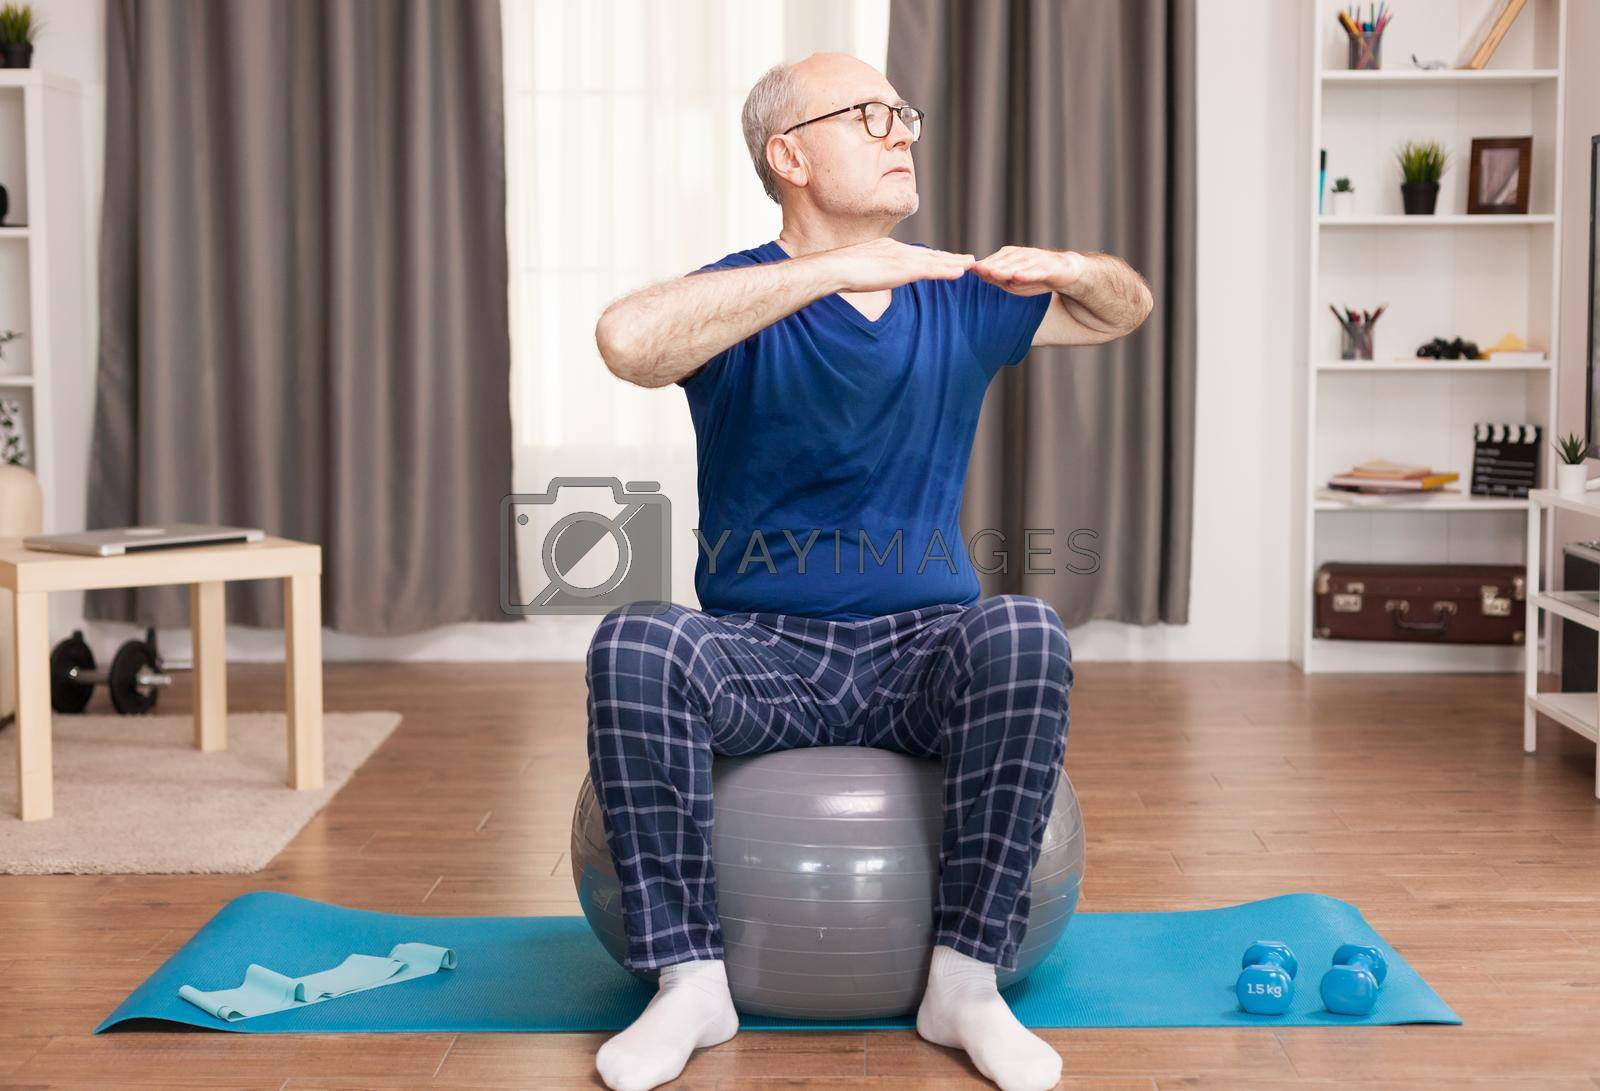 Active old man doing sport in his cozy apartment using swiss ball and yoga mat. Old person pensioner online internet exercise training at home sport activity with dumbbell, resistance band, swiss ball at elderly retirement age.